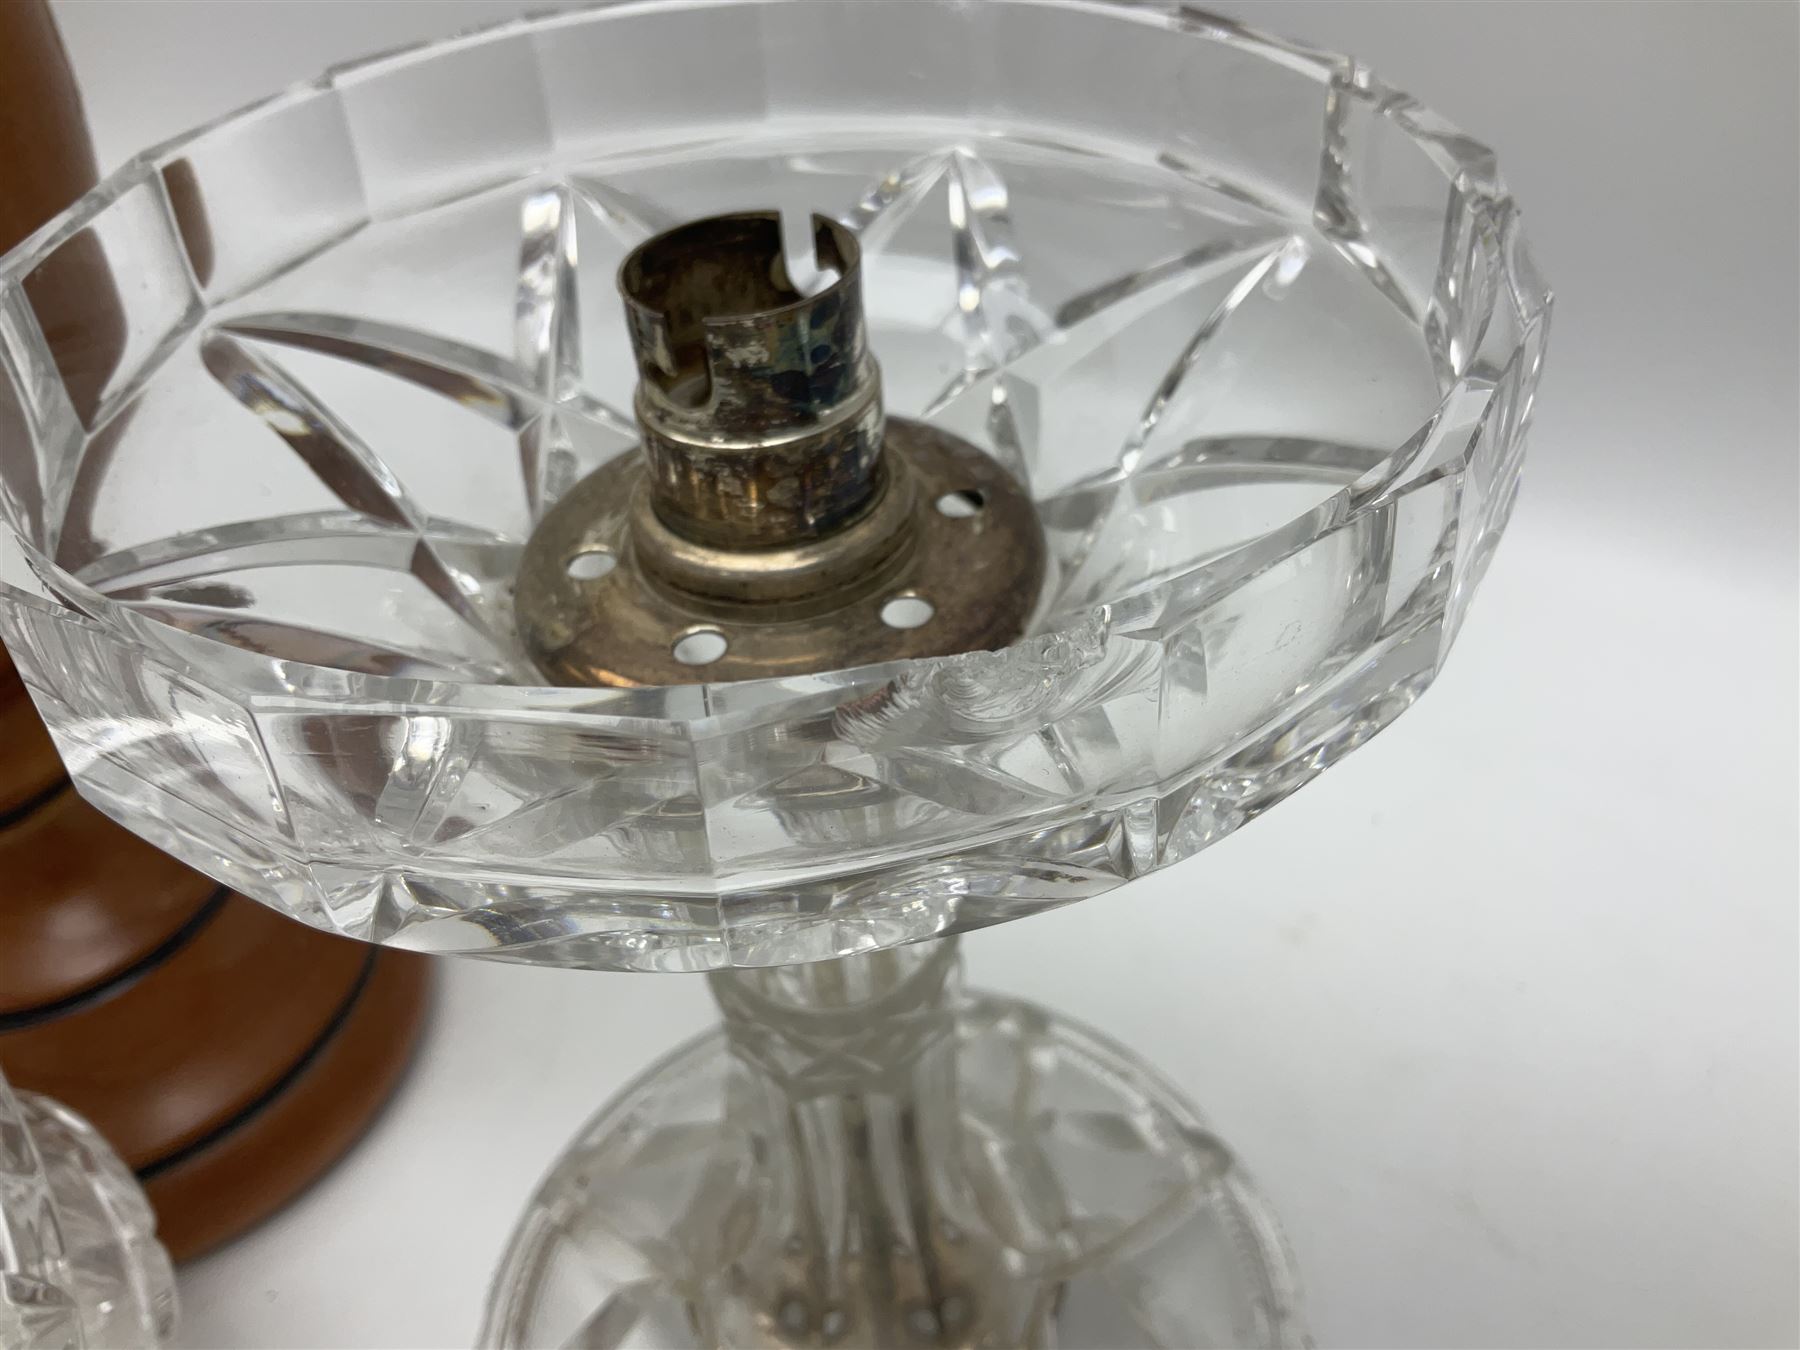 Mid 20th century cut glass table lamp with dome shade - Image 8 of 8